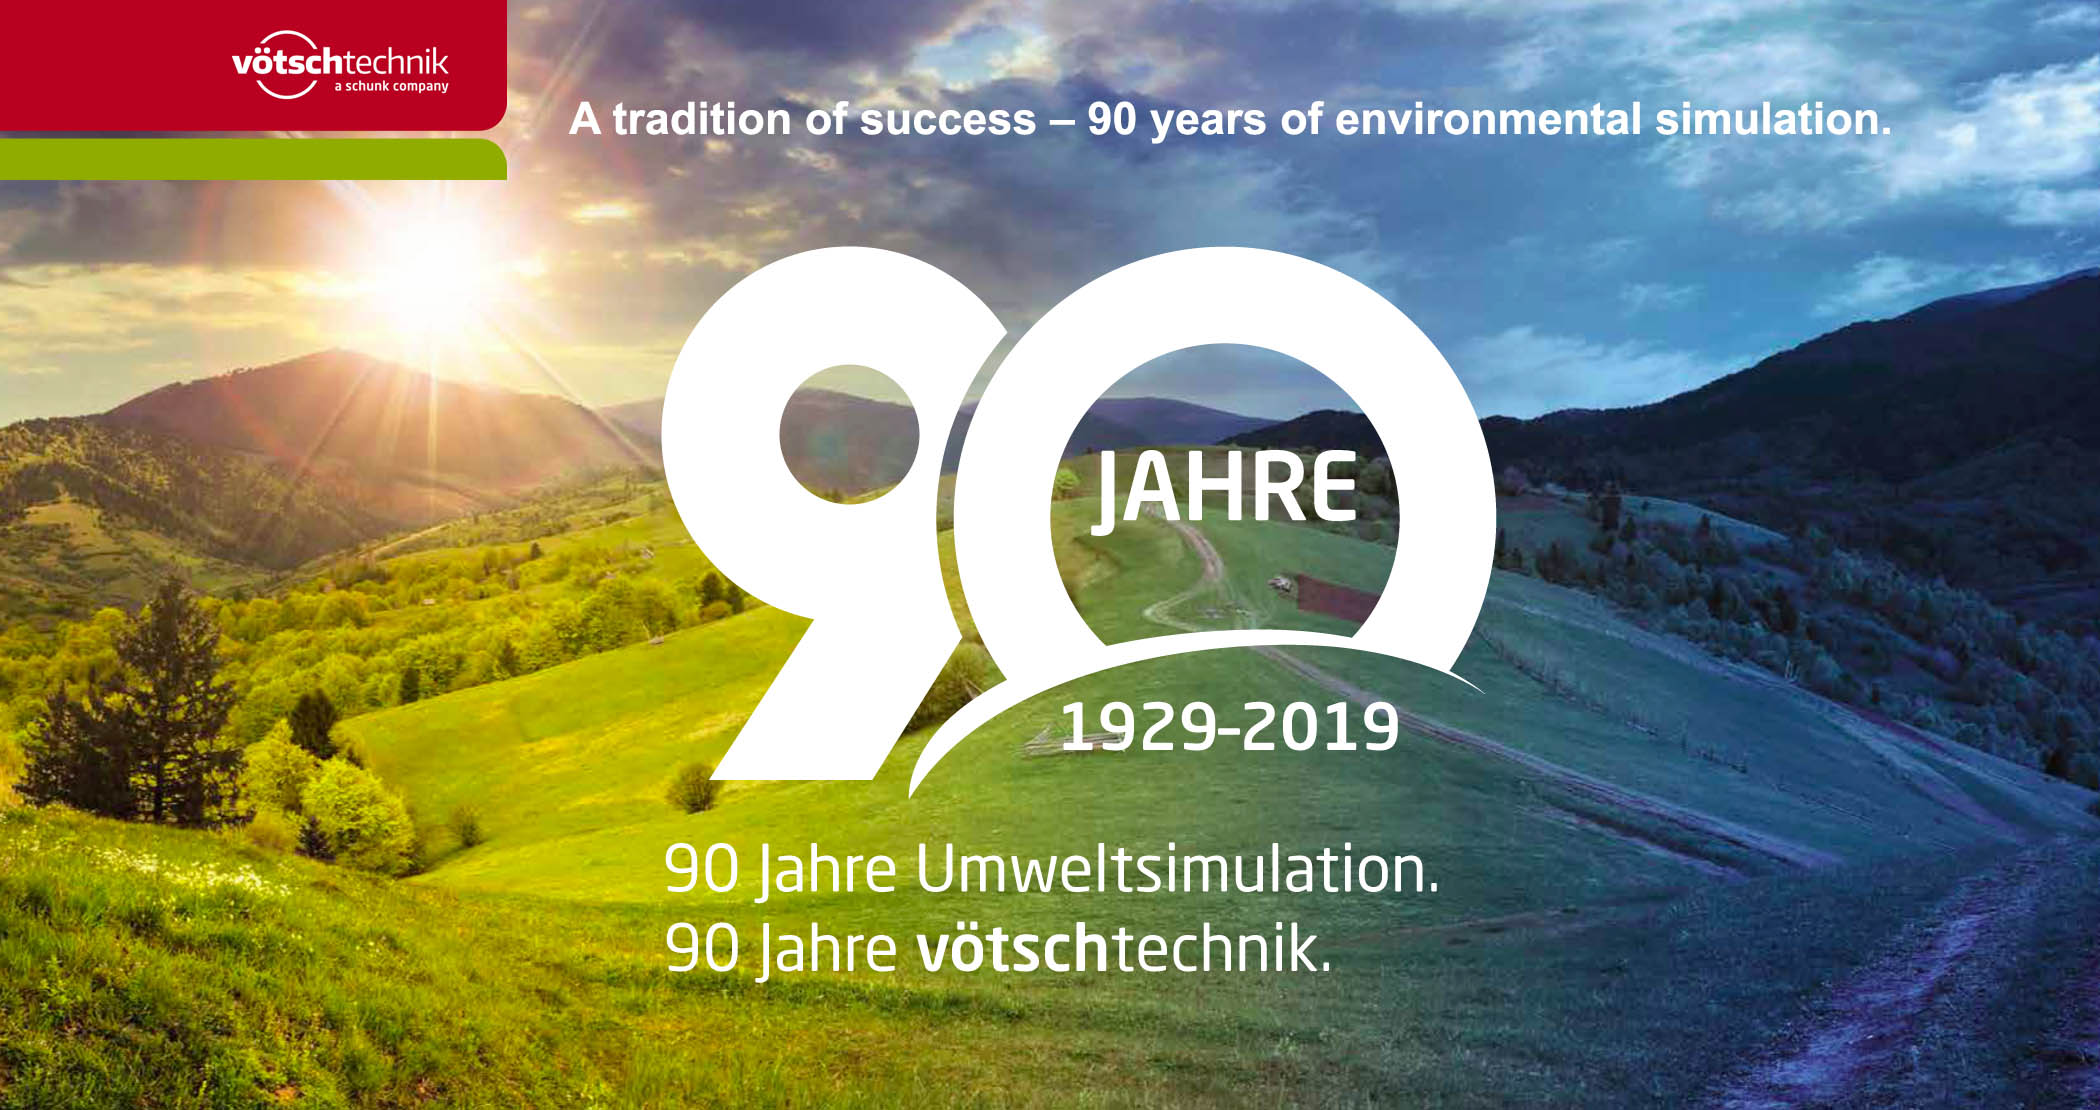 90 years of environmental simulation_Votsch